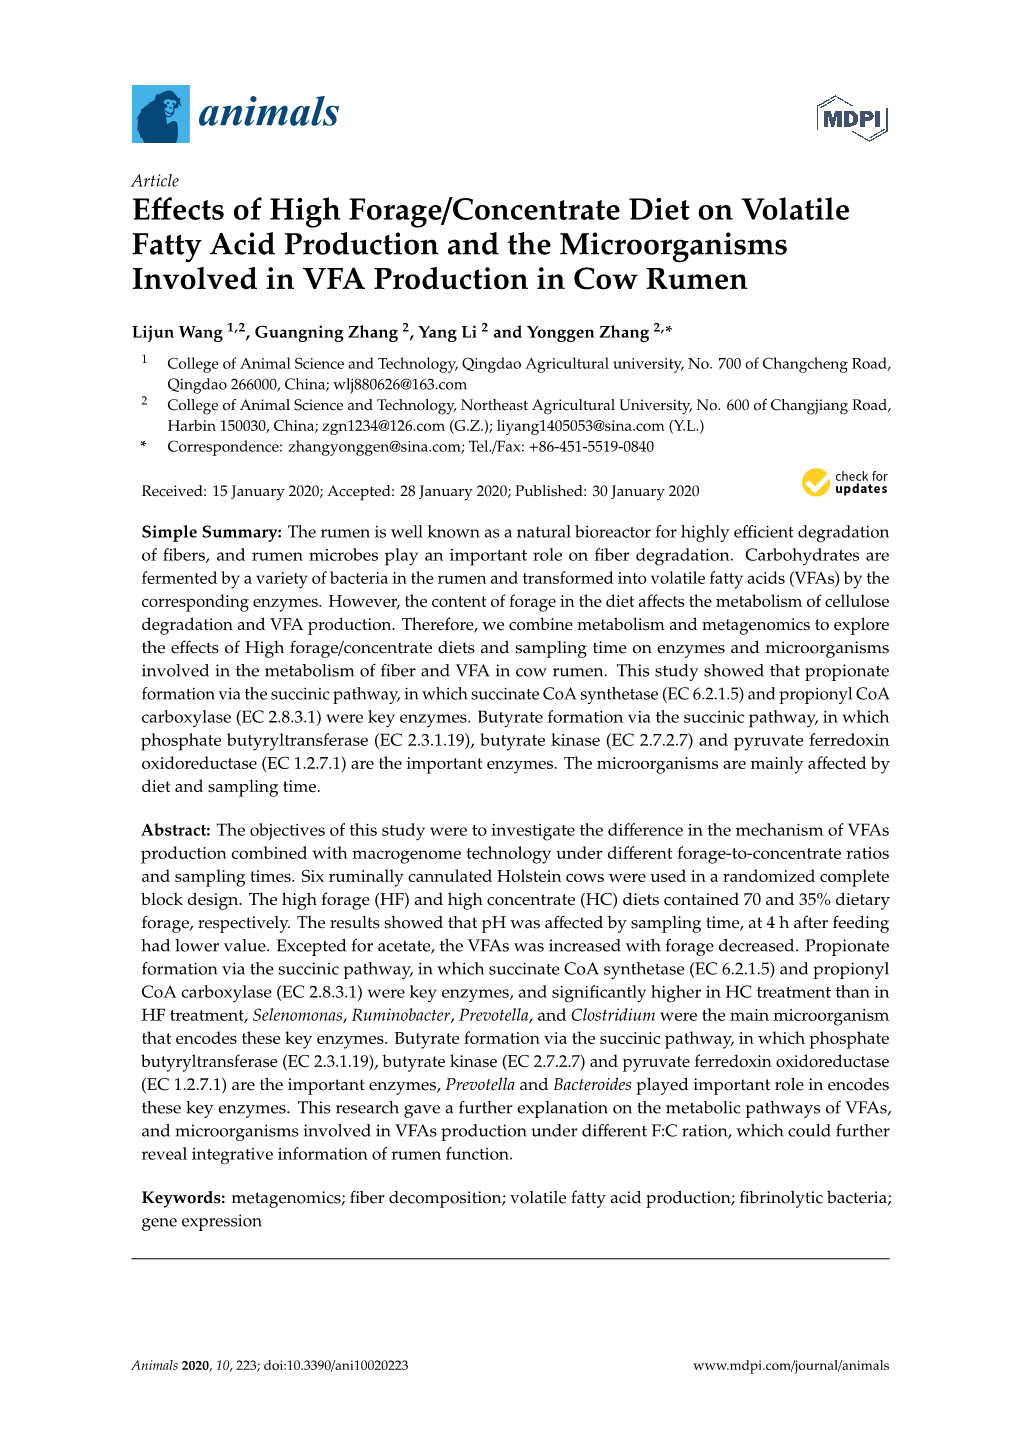 Effects of High Forage/Concentrate Diet on Volatile Fatty Acid